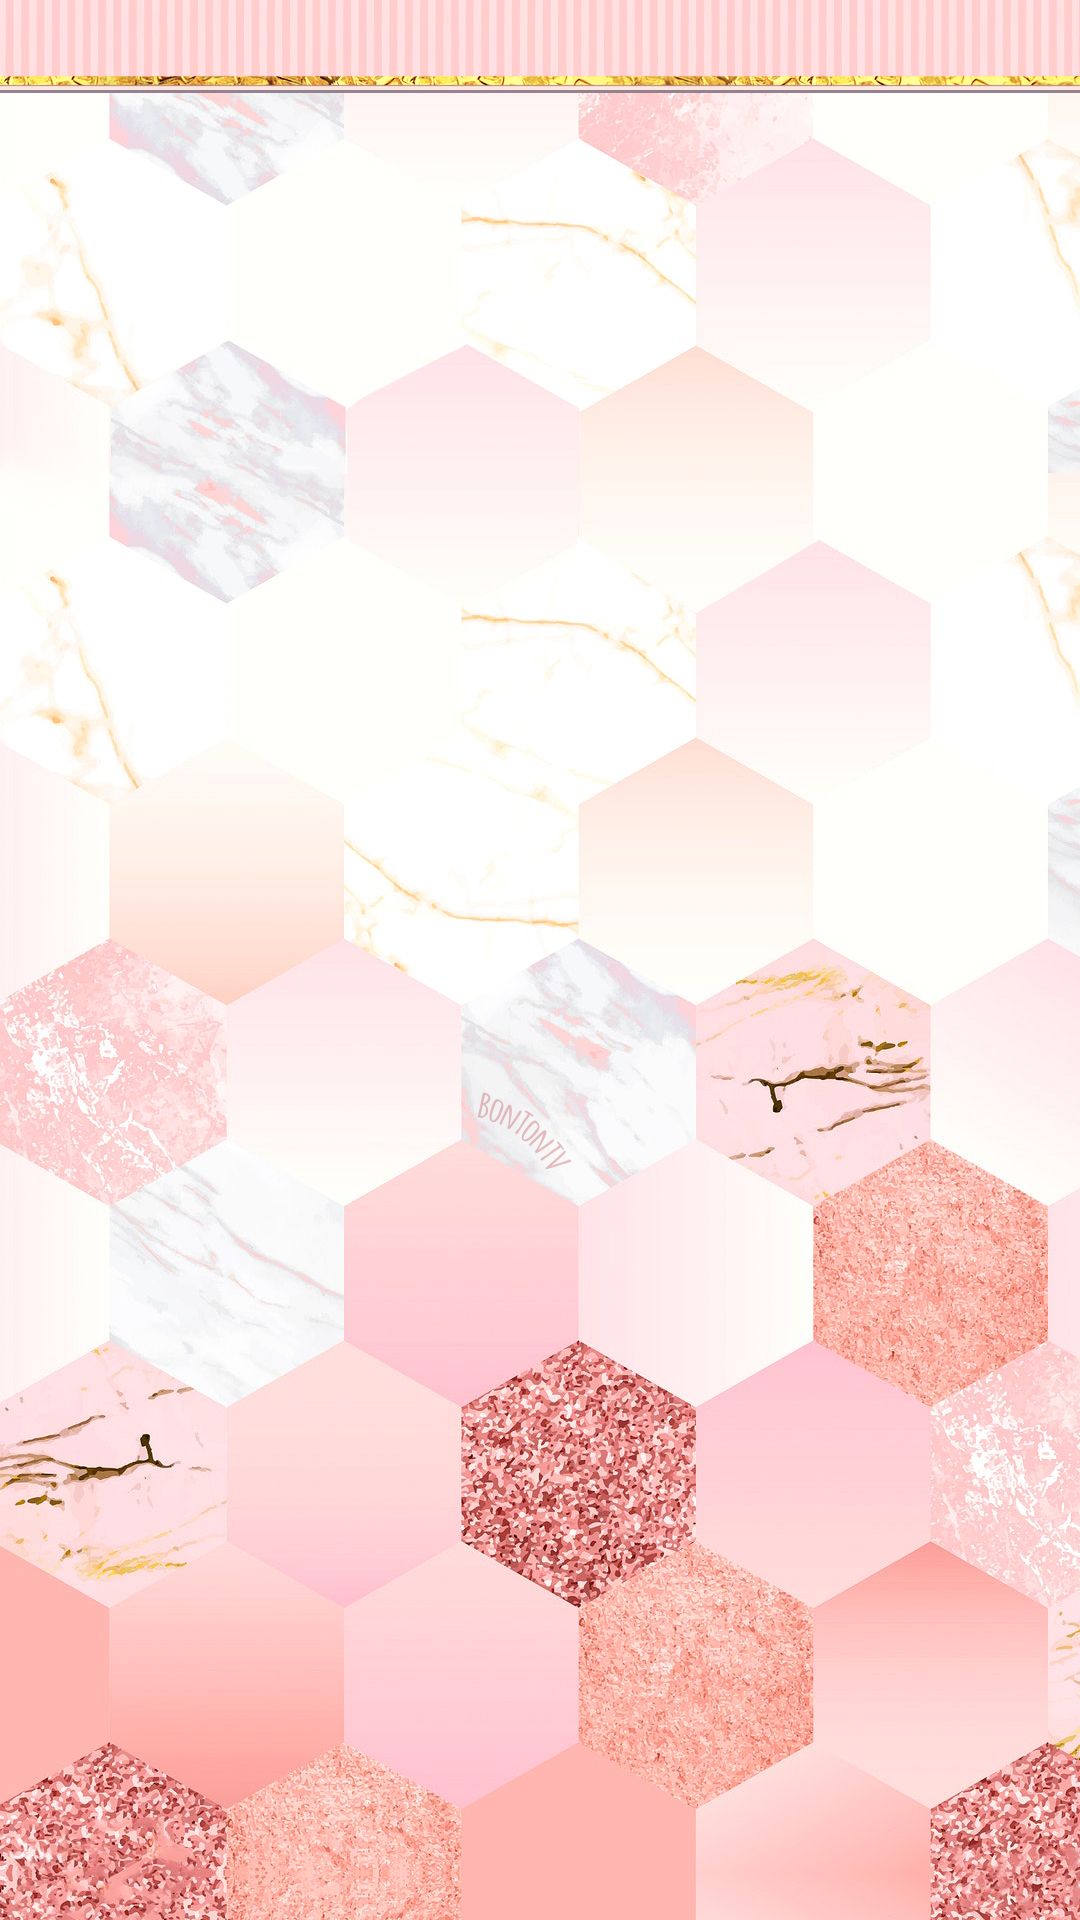 Phone Wallpaper HD Cute Girly Pink Hexagons With Gold By Bonton